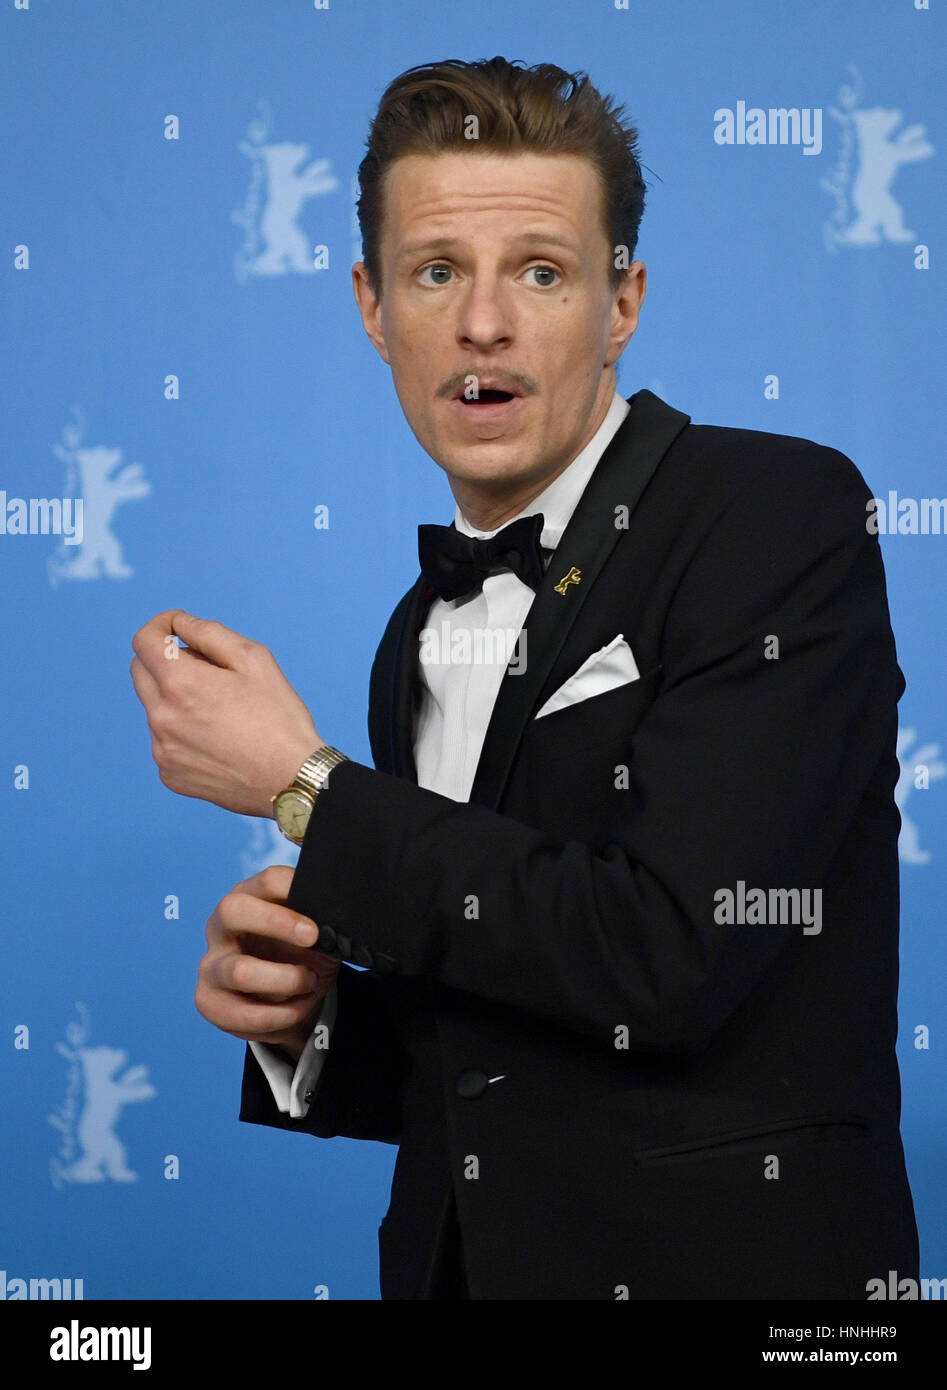 Berlin, Germany. 12th Feb, 2017. The actor Alexander Scheer arrives for the photo call of the film 'The Young Karl Marx' at the 67th International film festival in Berlin, Germany, 12 February 2017. The film will be aired in the section 'Berlinale Special'. Photo: Monika Skolimowska/dpa/Alamy Live News Stock Photo